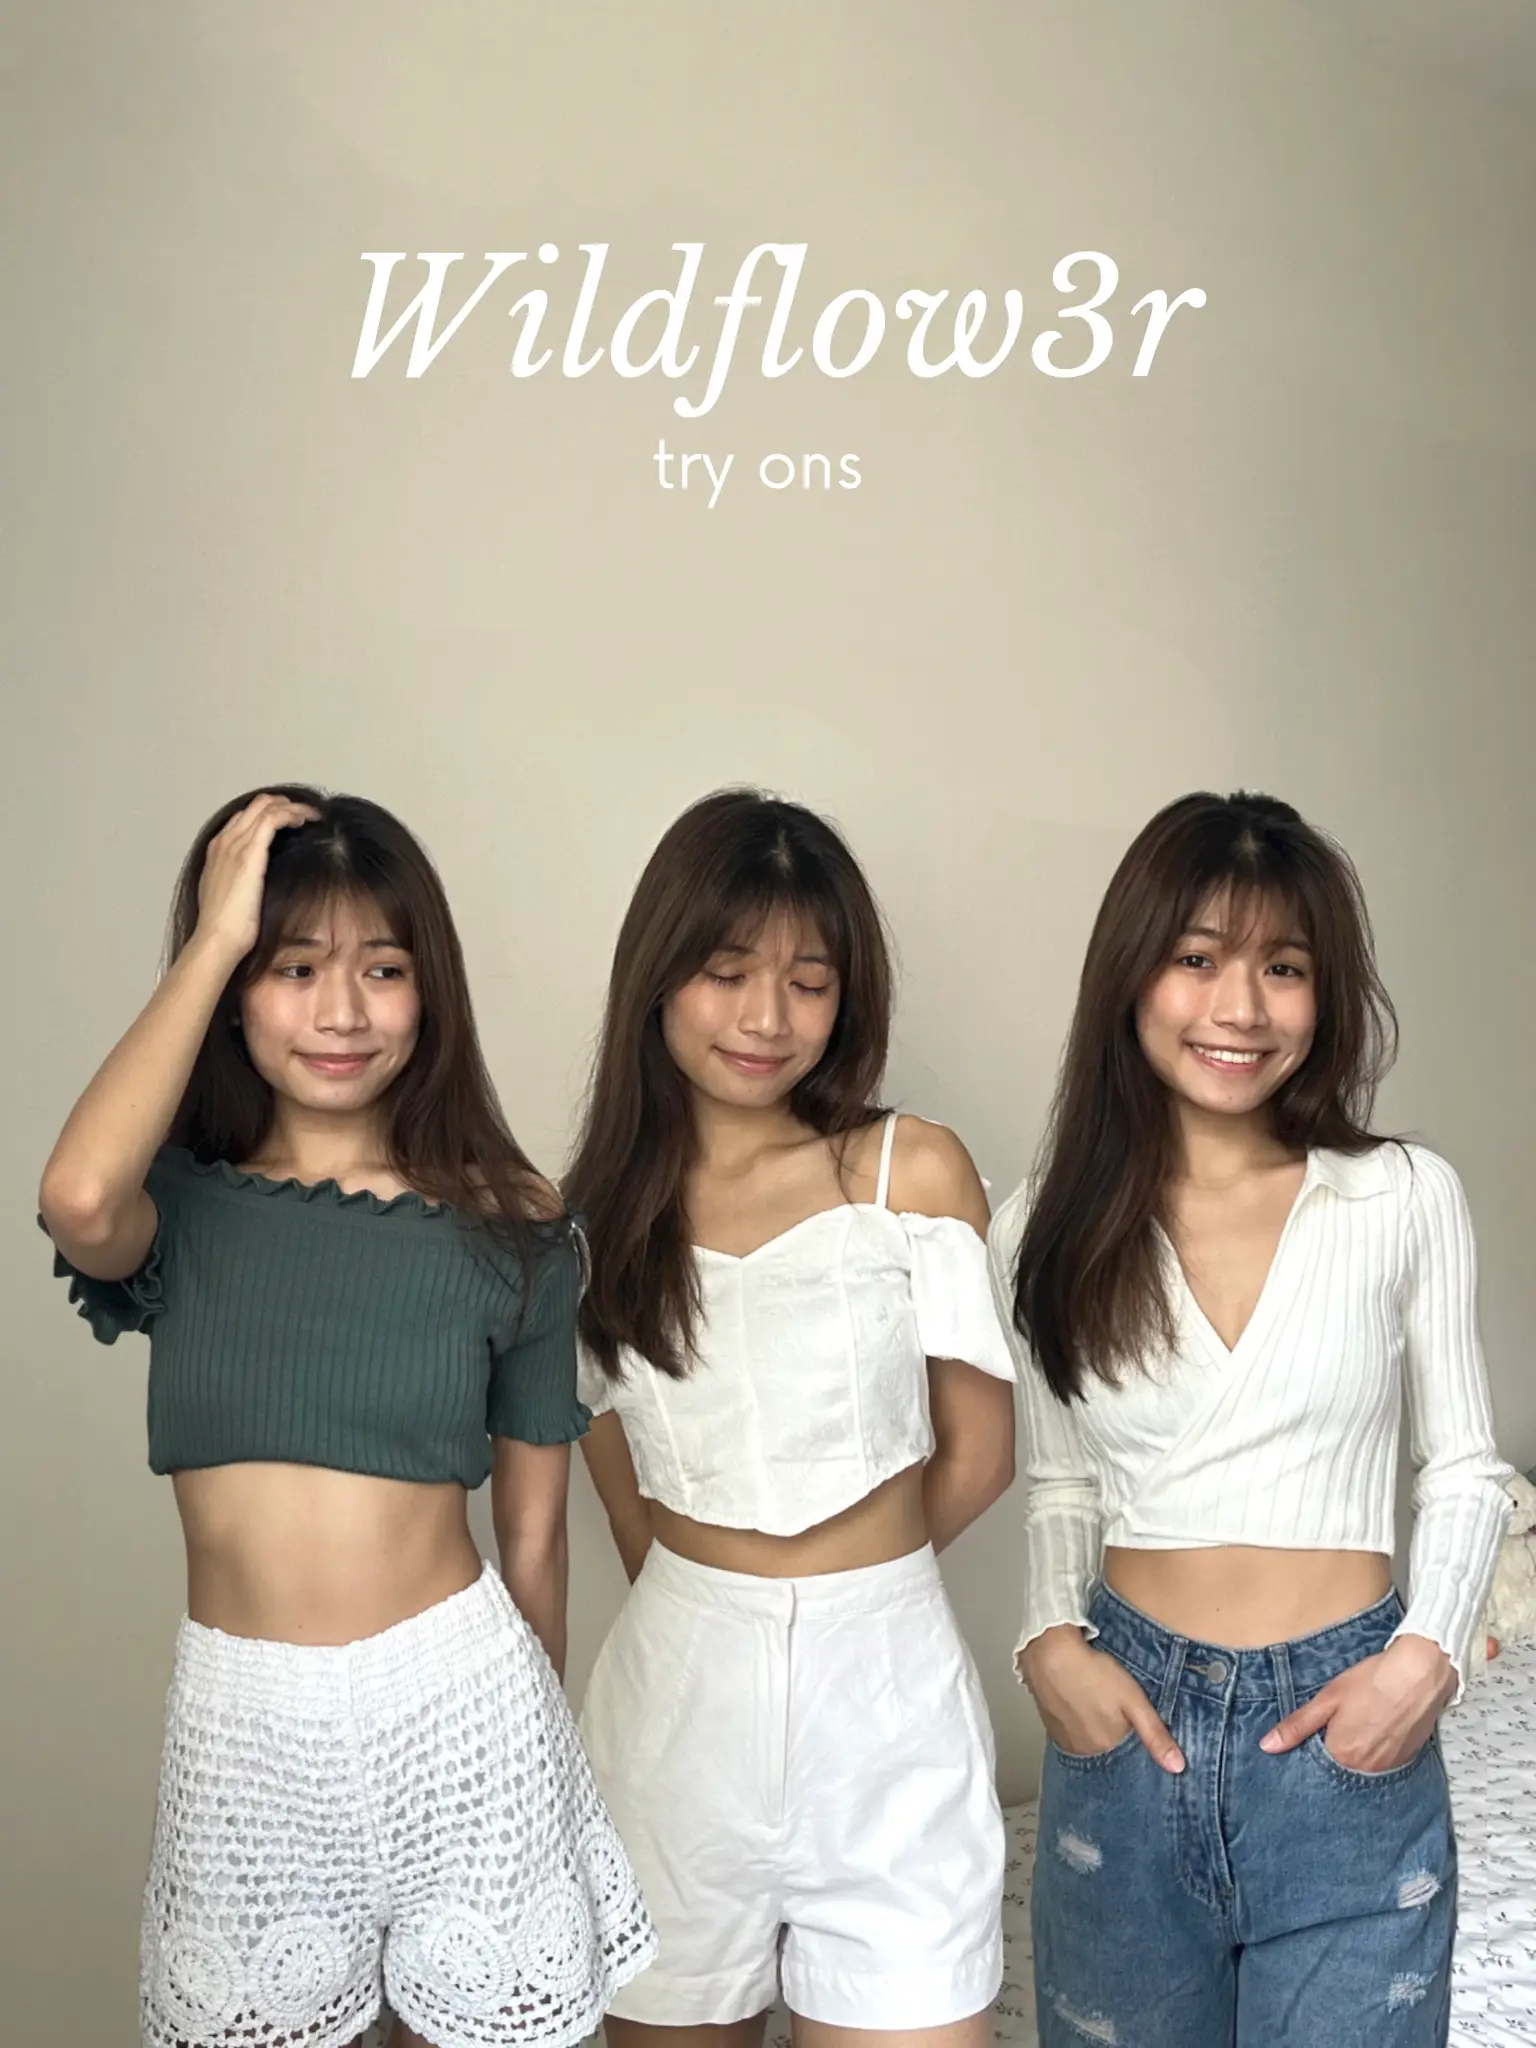 BRANDY MELVILLE NOW SHIPS TO SG & my try-ons🤭, Gallery posted by yuki  ⋆˚✿˖°